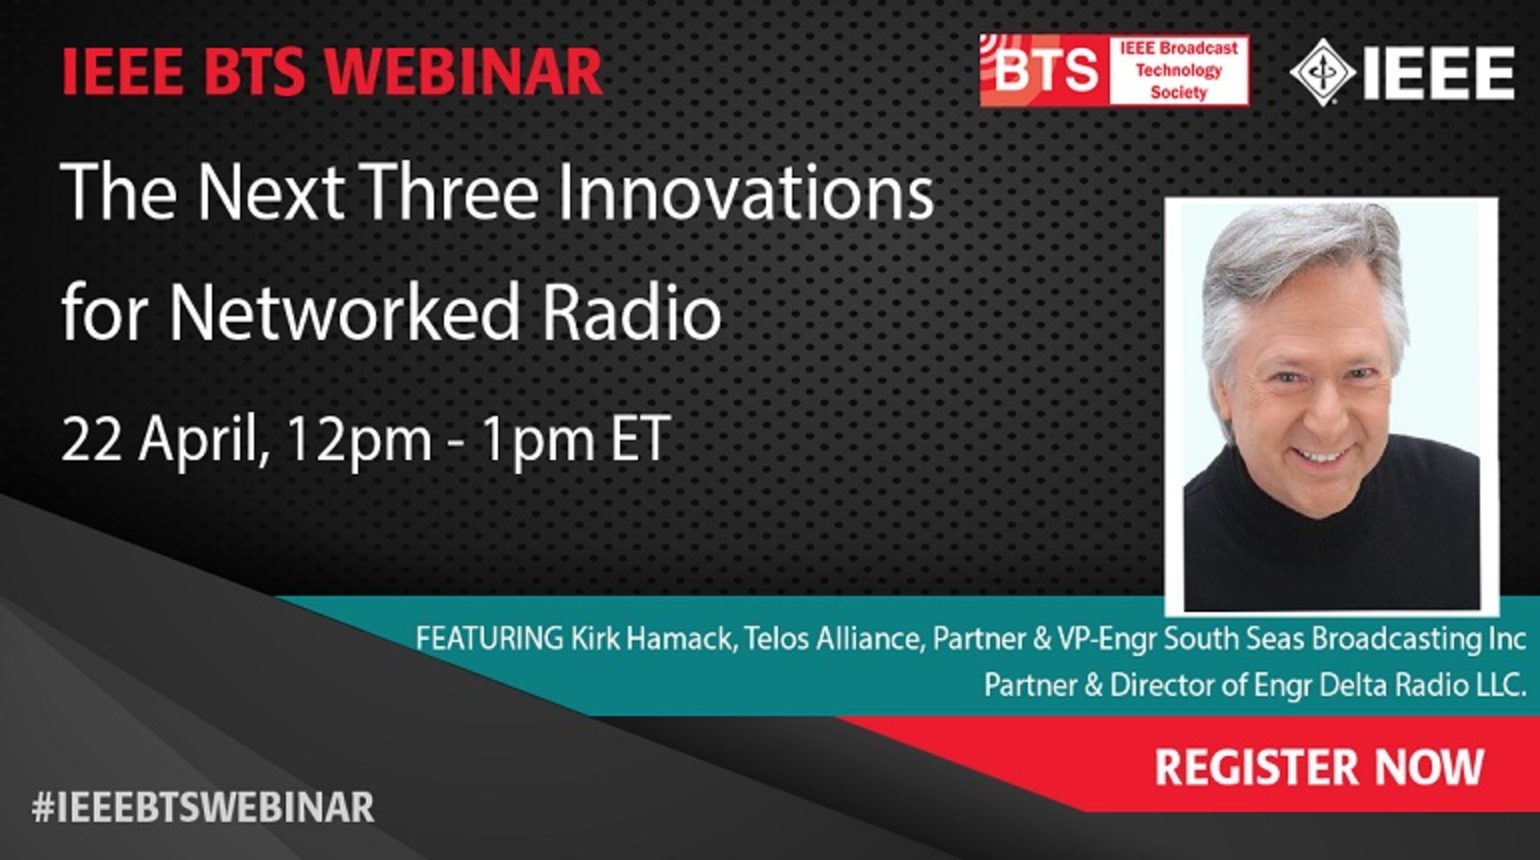 The Next Three Innovations for Networked Radio